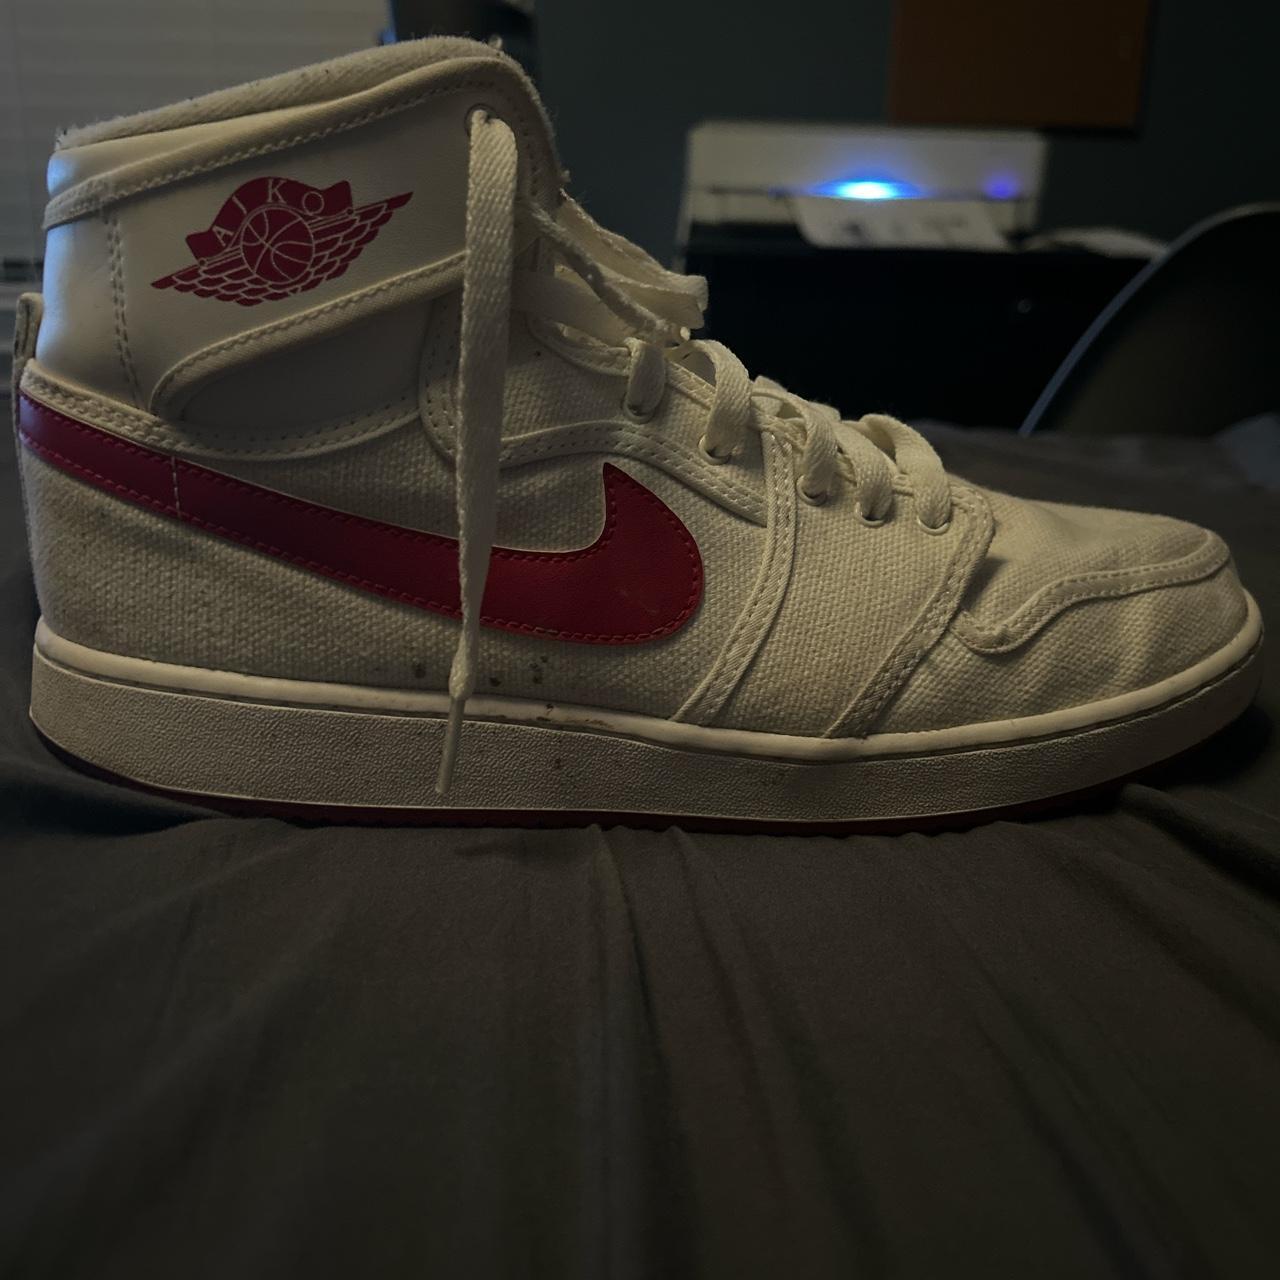 Jordan Men's White and Red Trainers